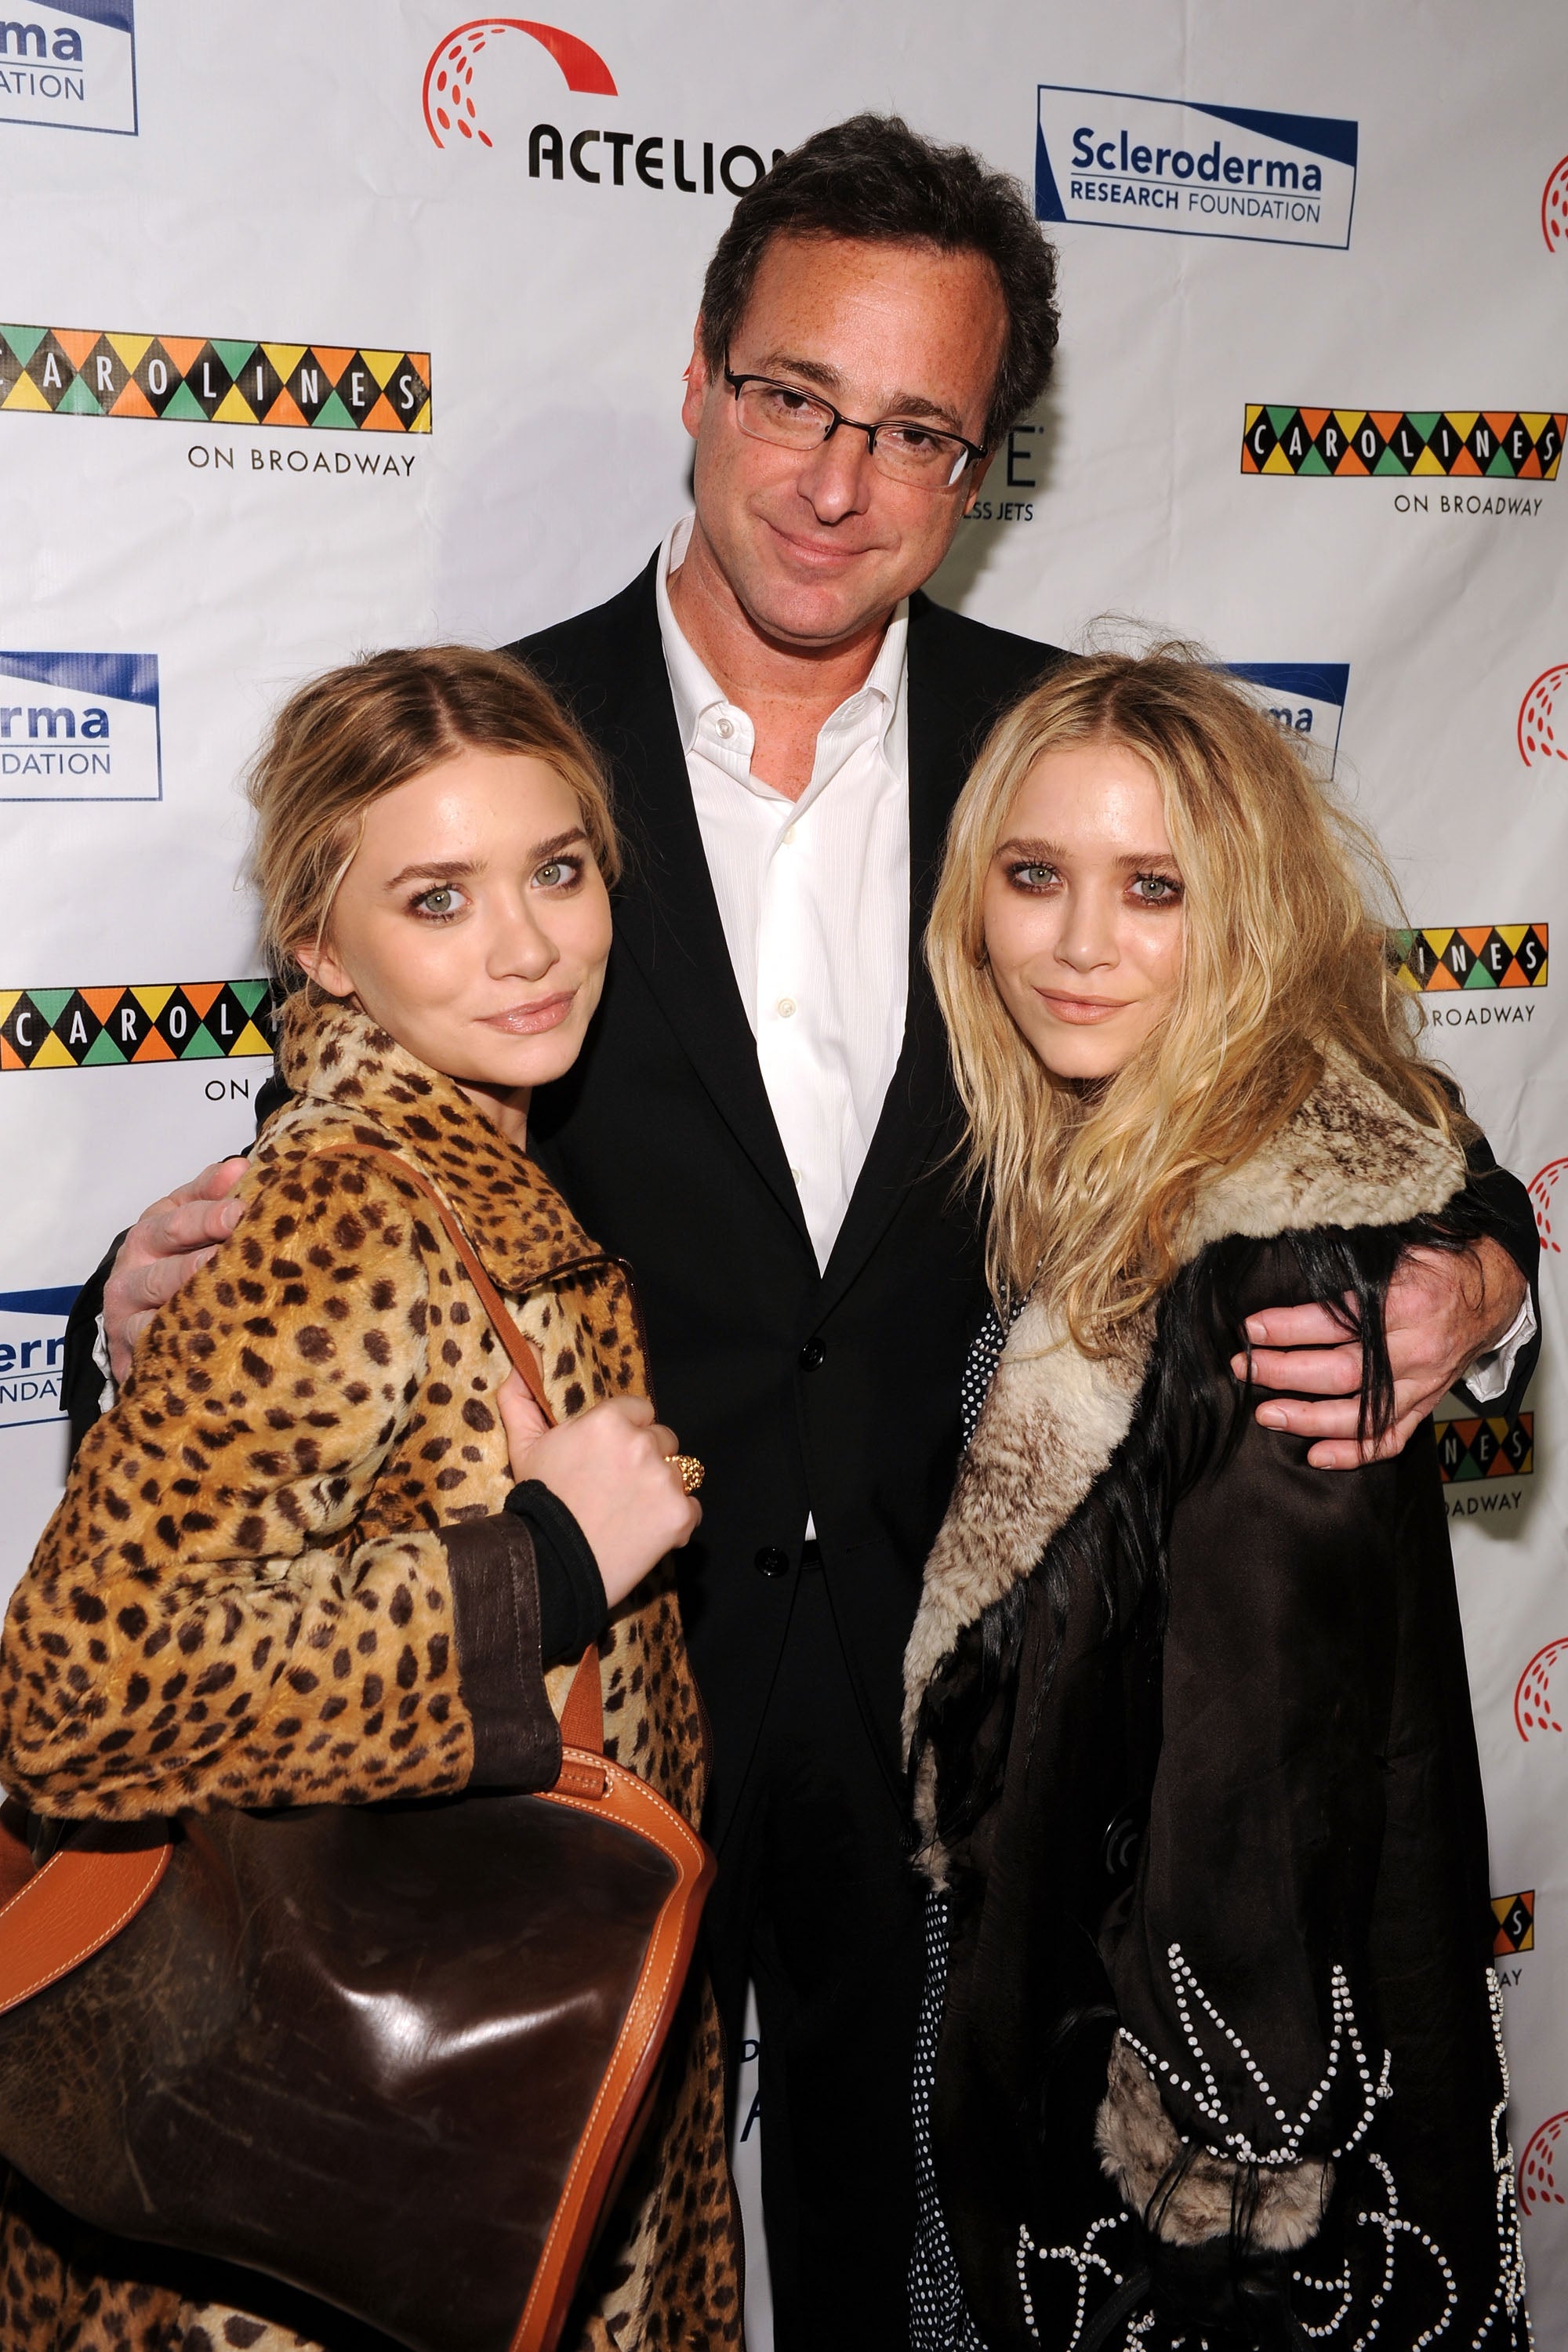 Actors Mary-Kate Olsen, Bob Saget and Ashley Olsen attend "Cool Comedy Hot Cuisine 2009" hosted by the Scleroderma Research Foundation at Carolines On Broadway on November 9, 2009 in New York City | Source: Getty Images